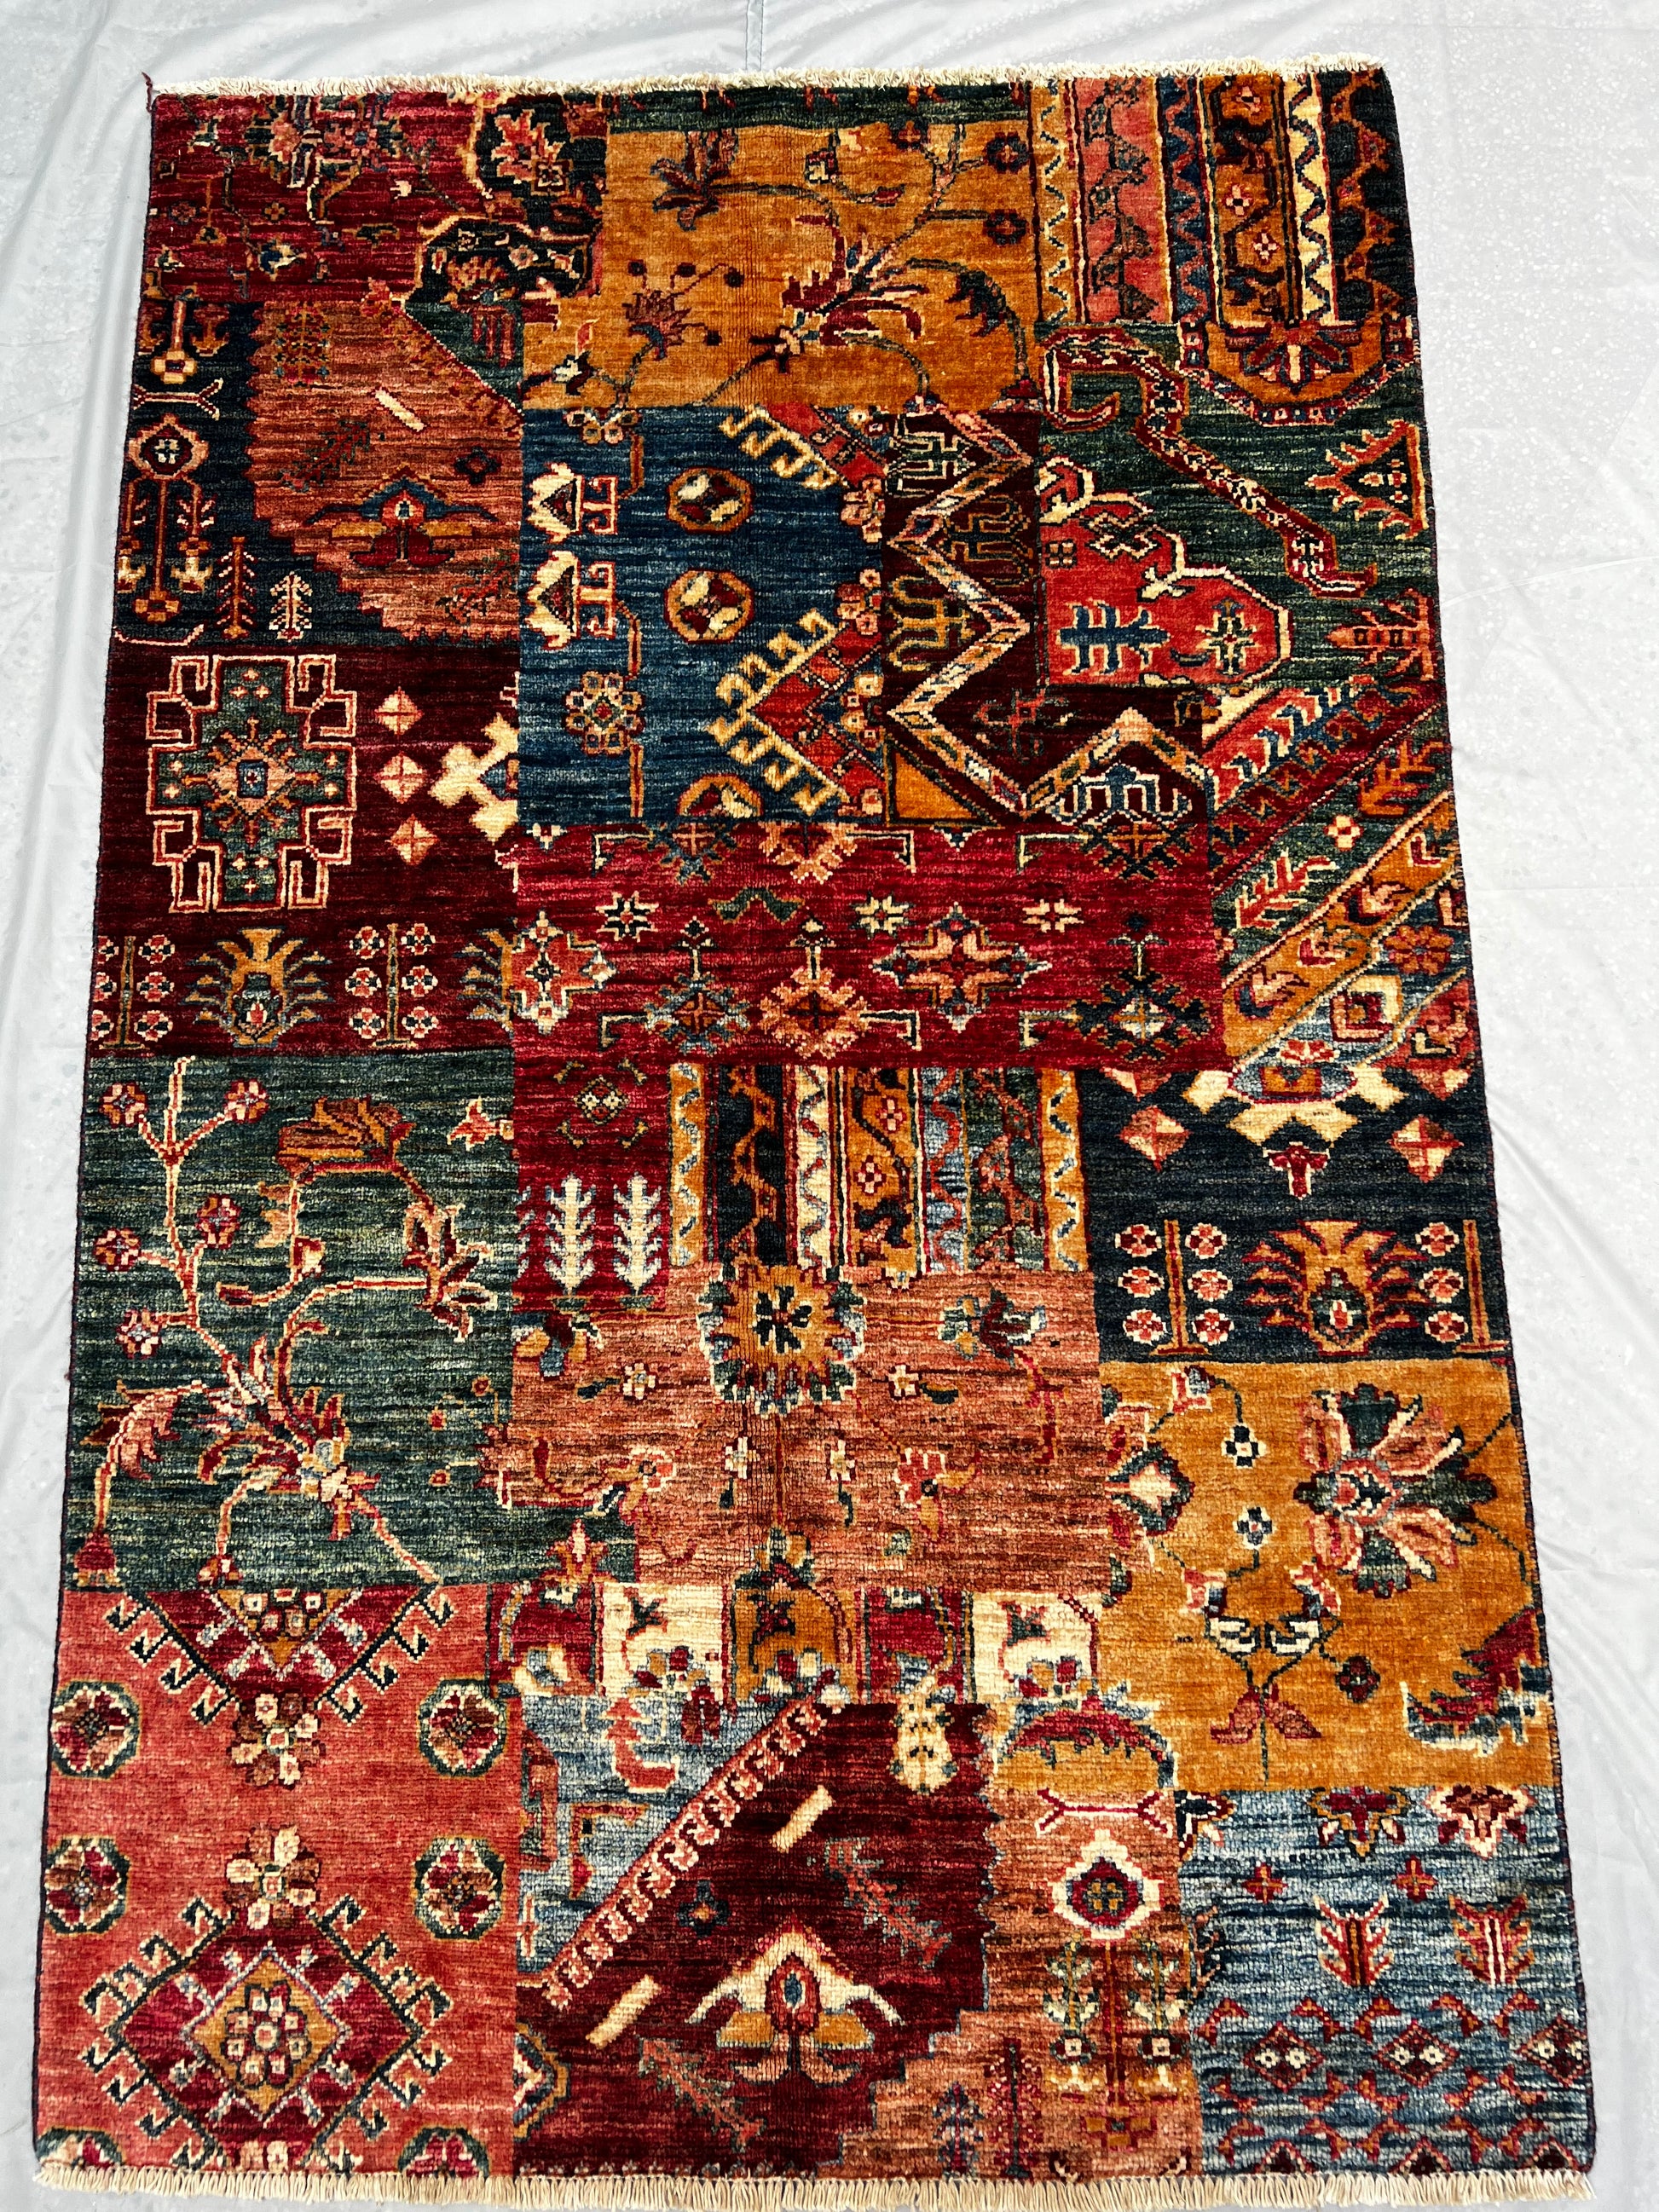 Afghan Hand Knotted/ Knitted Living Room/Dining Room Chob Rang(Shawl Design) Area Rug 4.7ftx3.1ft (CH-M-4.7X3.12-6-N) (Kabul) - Kabul Rugs